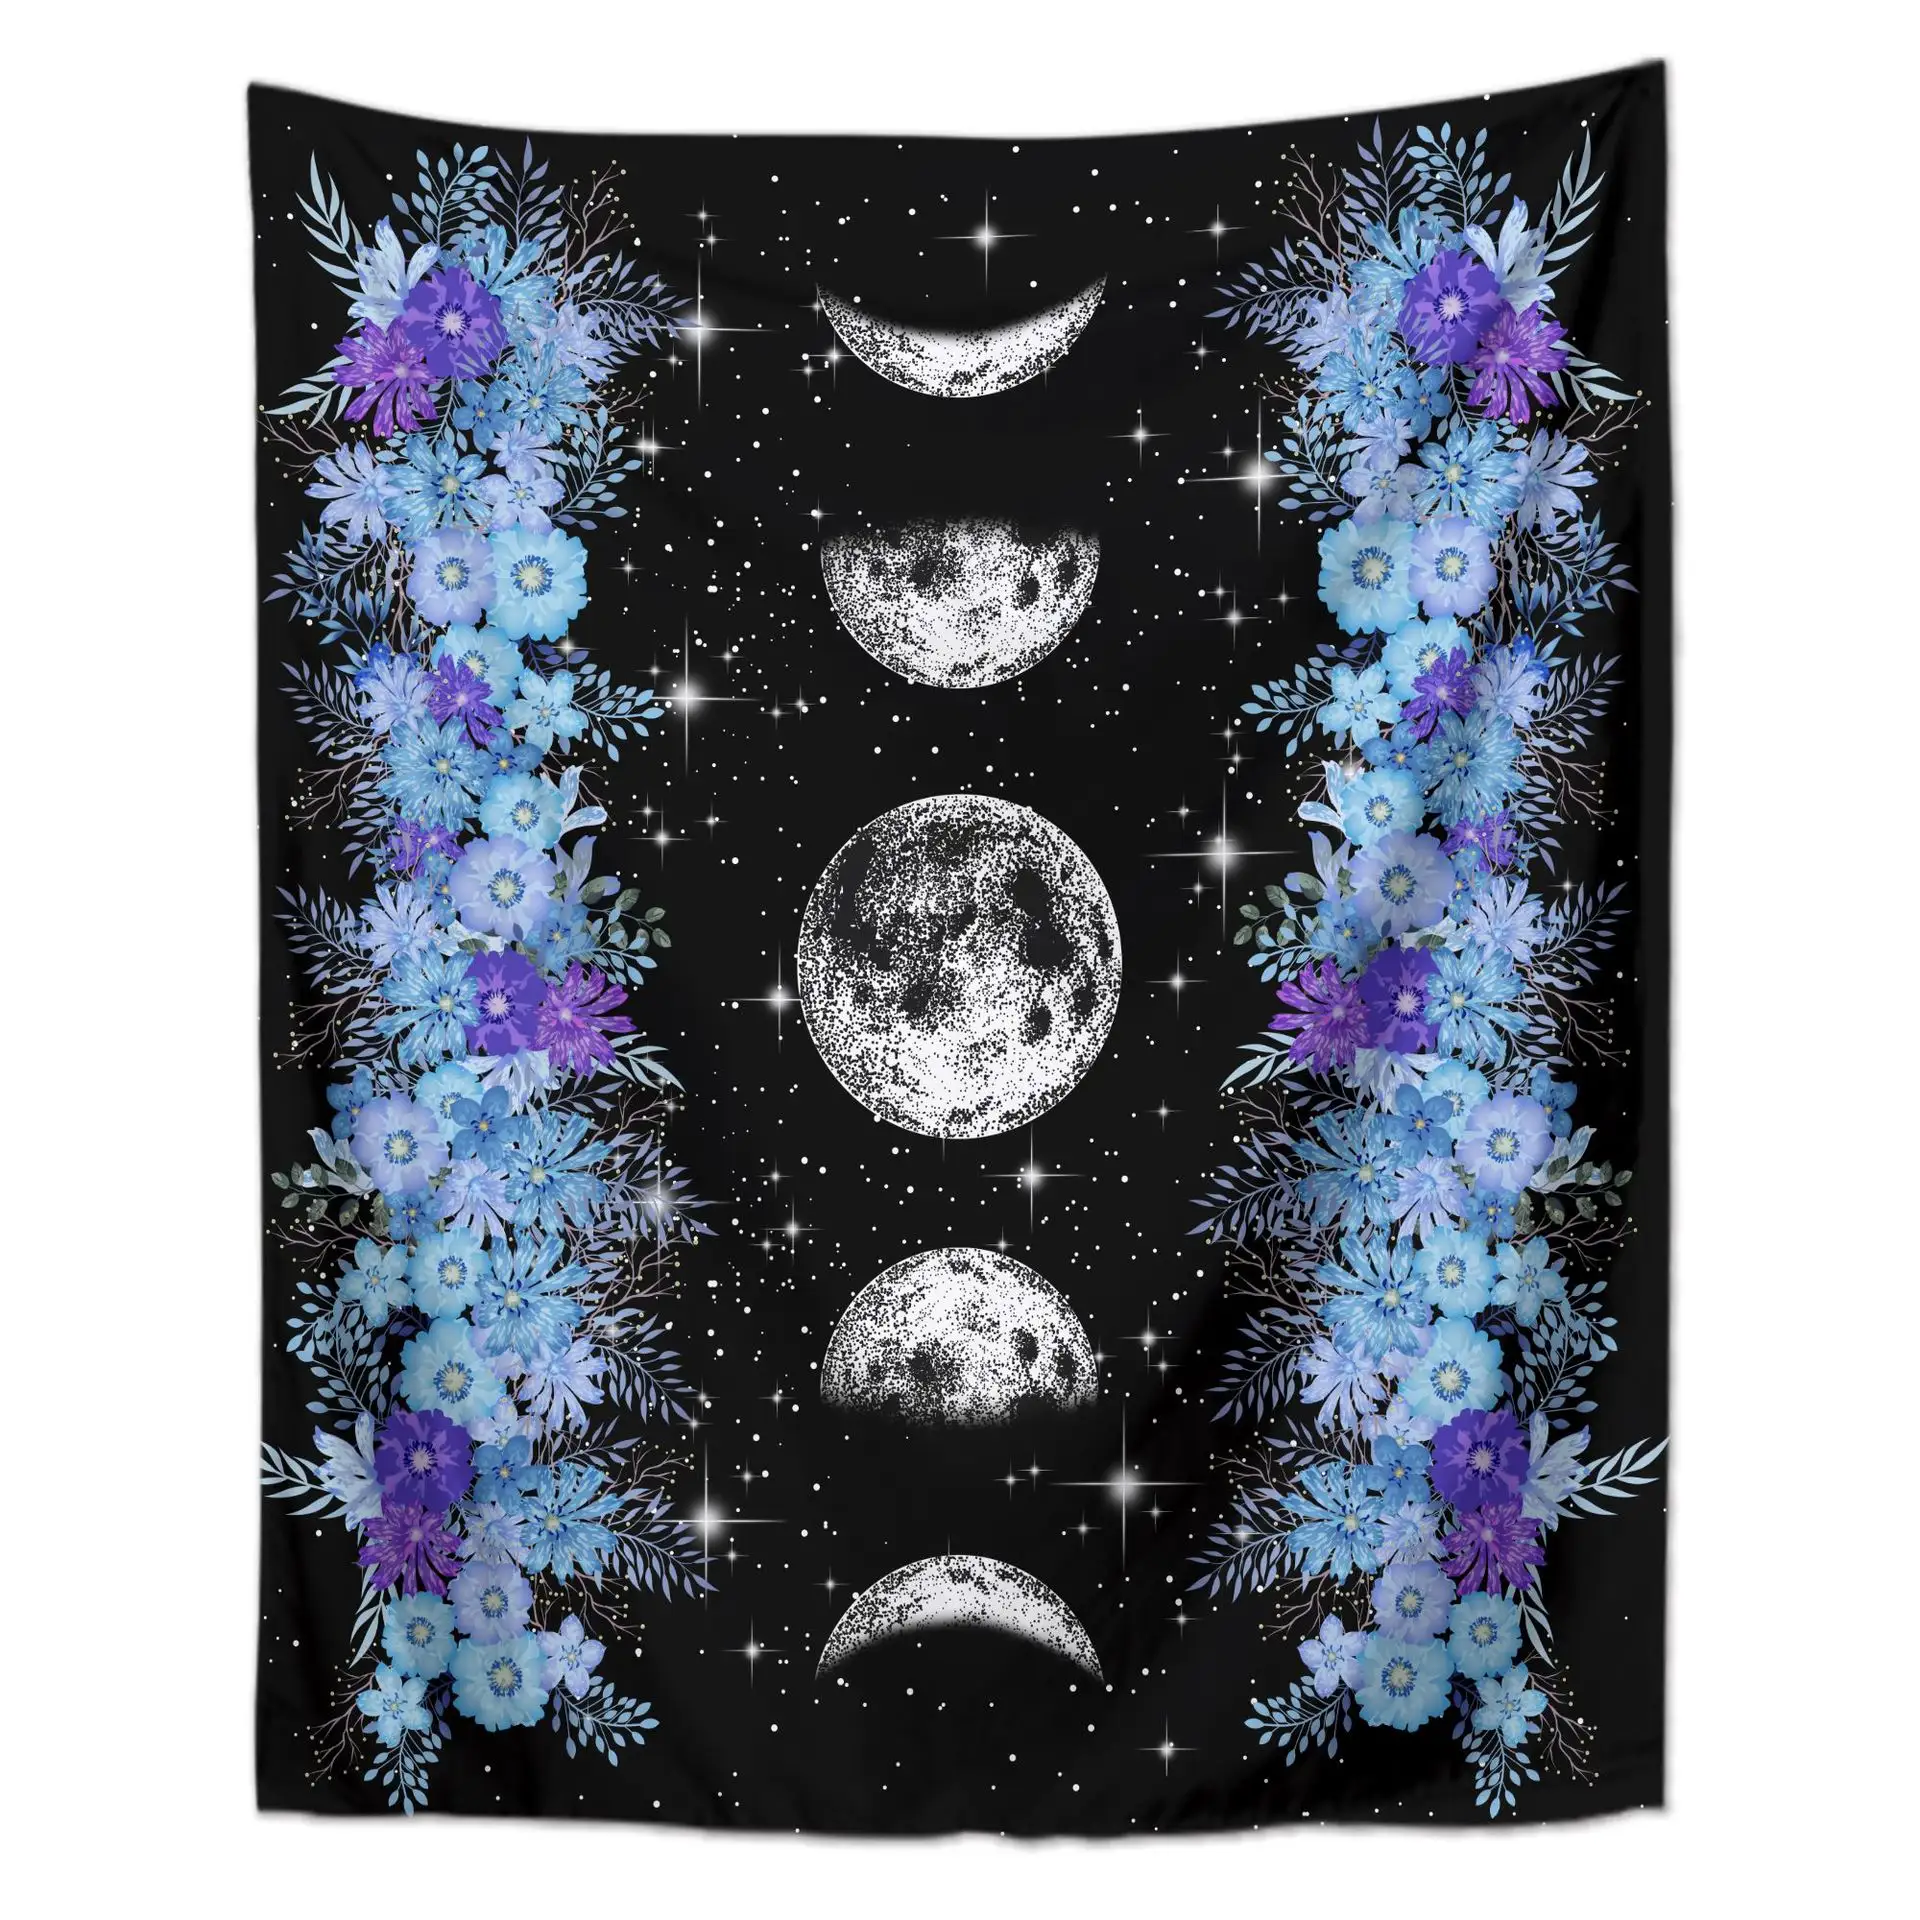 Vintage Moon Phase Tapestries Flower Vine Tapestry Black Background Floral Tapestry Wall Hanging for Room